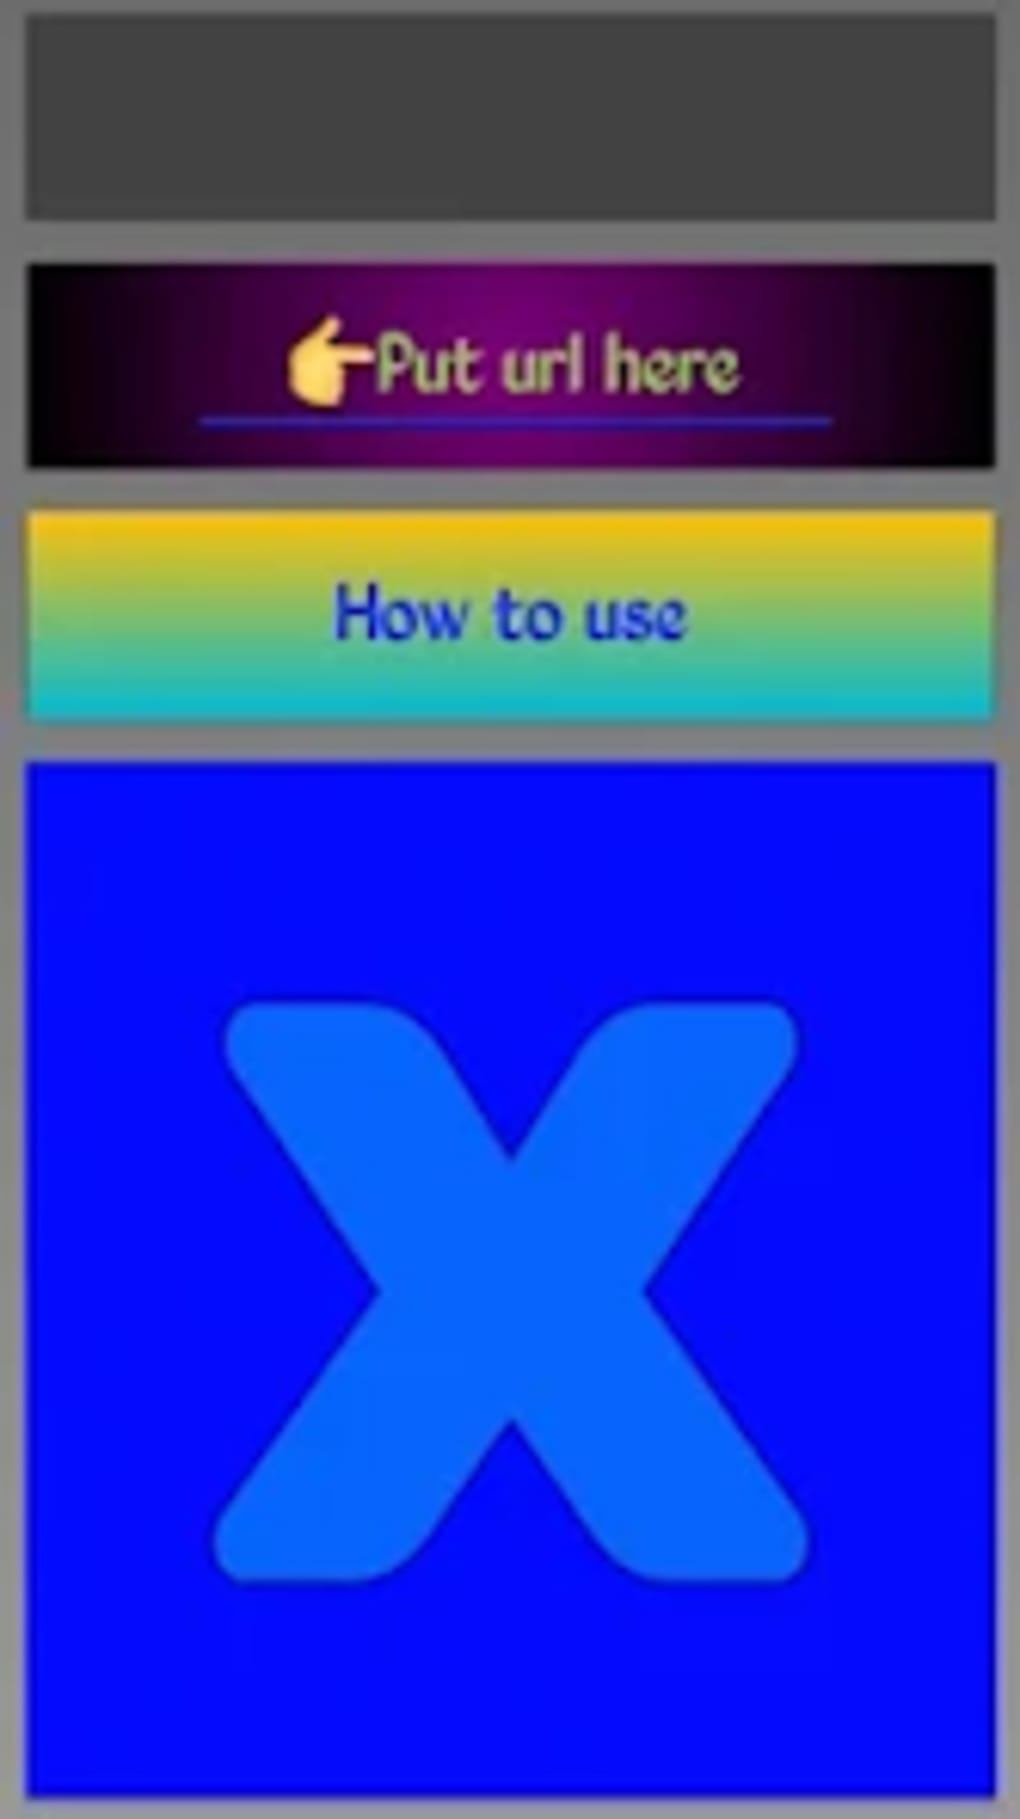 XNXX-Videos Guide Android 版- 下载 image